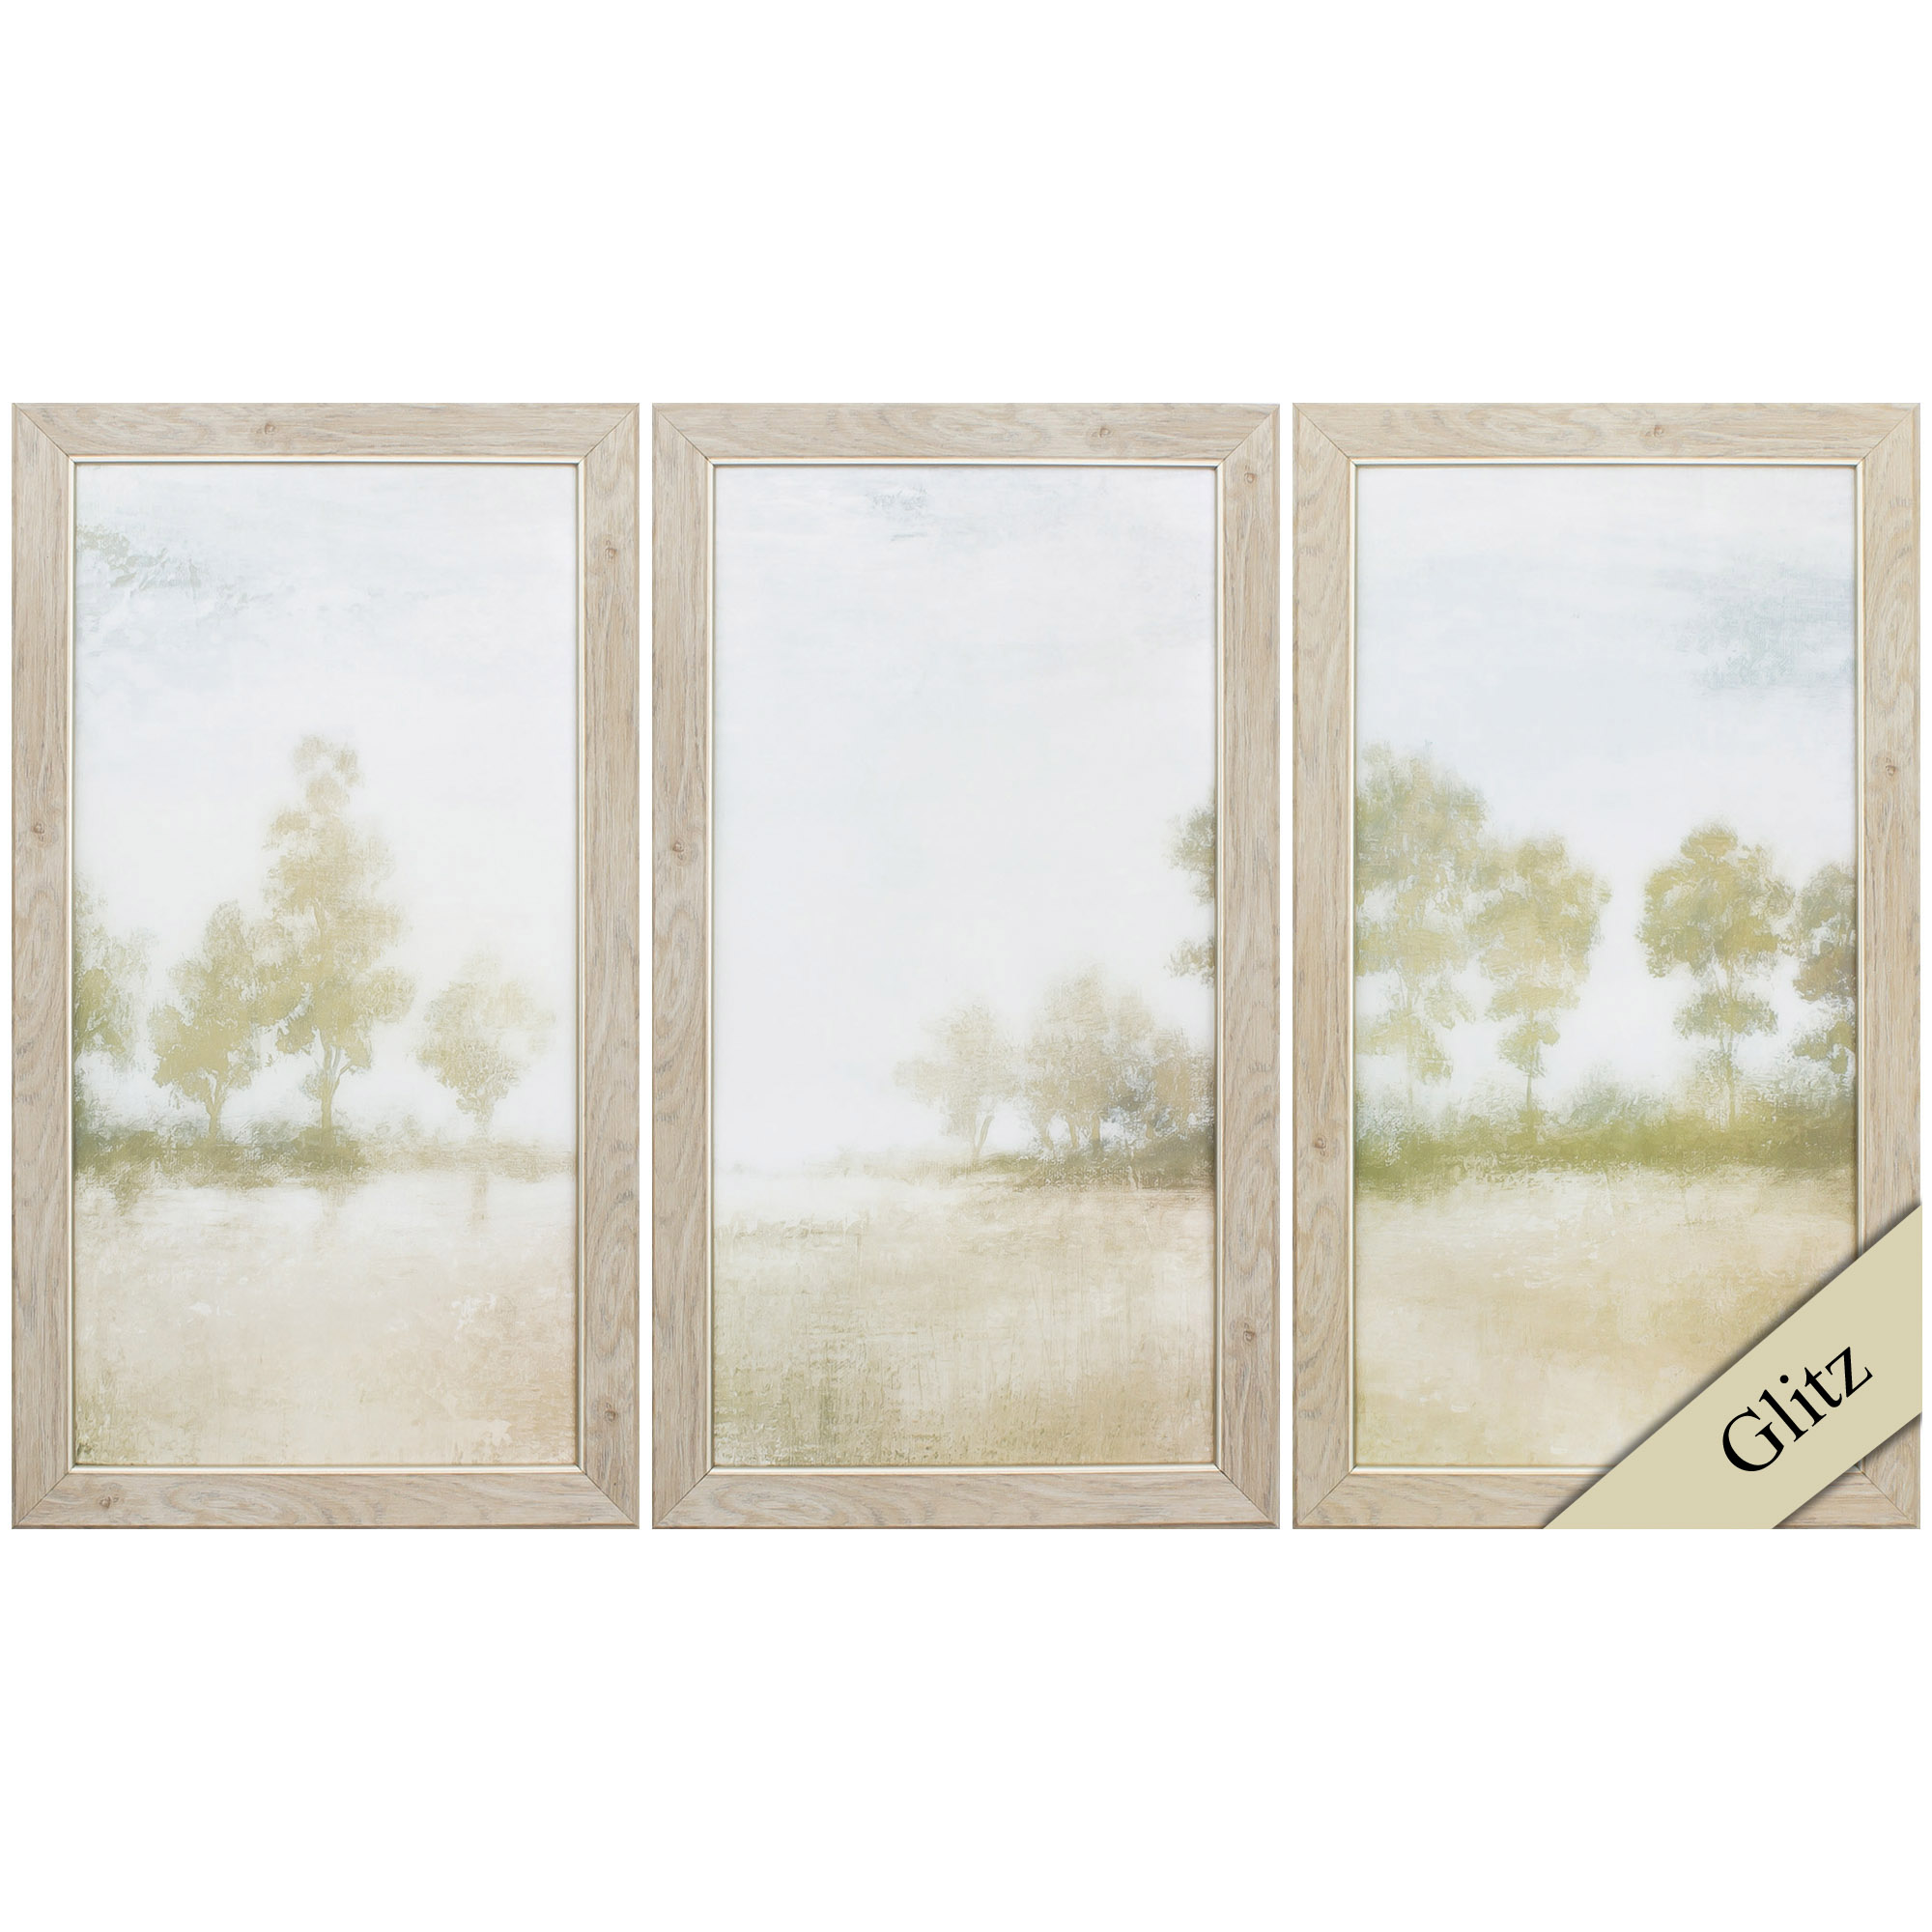 15" X 27" Ligth Wood Toned Frame Soft Distant Valley (Set of 3)